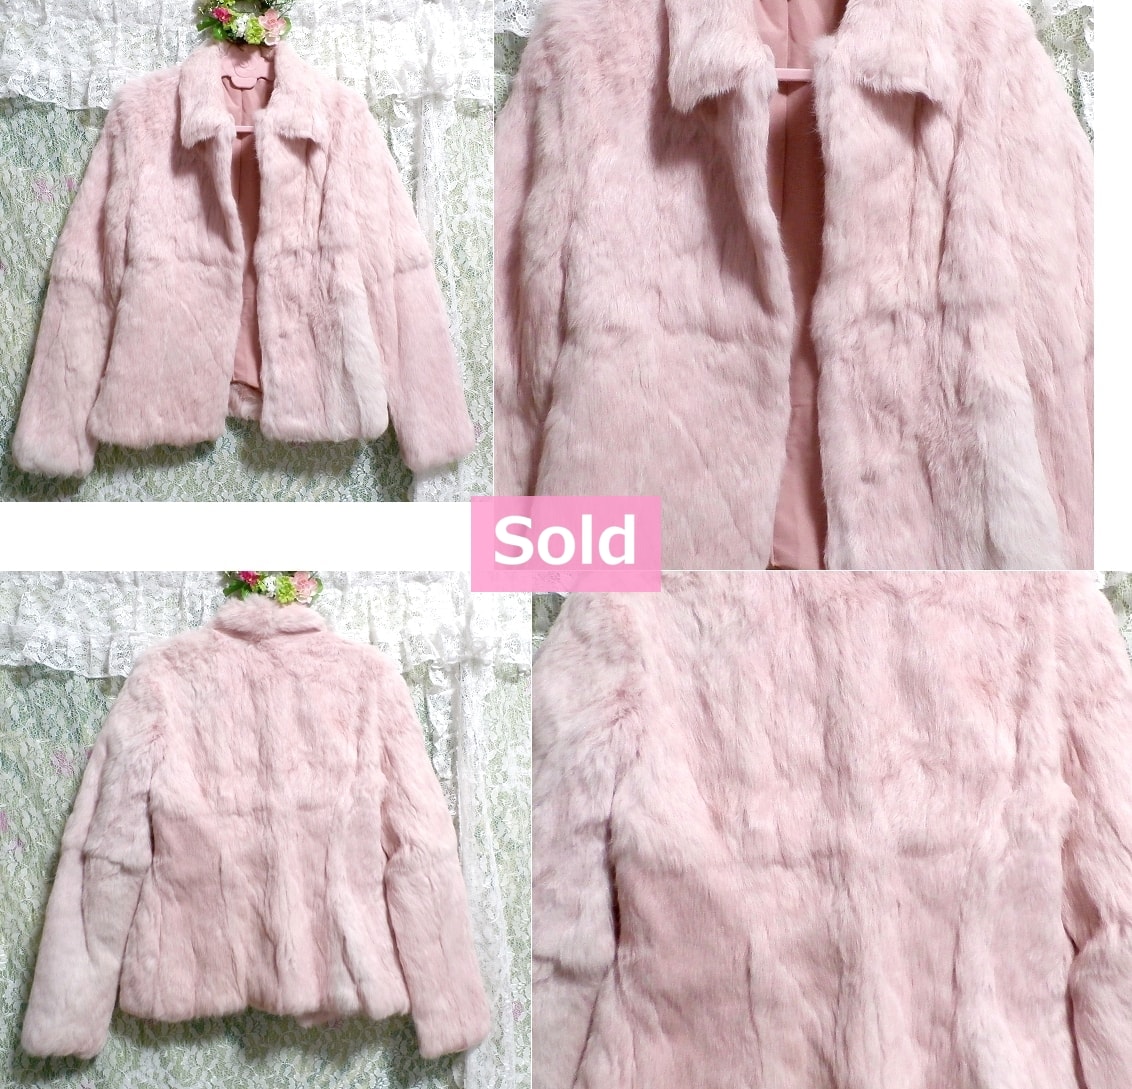 Cute pink peach color rabbit fur coat lining dark pink / outer